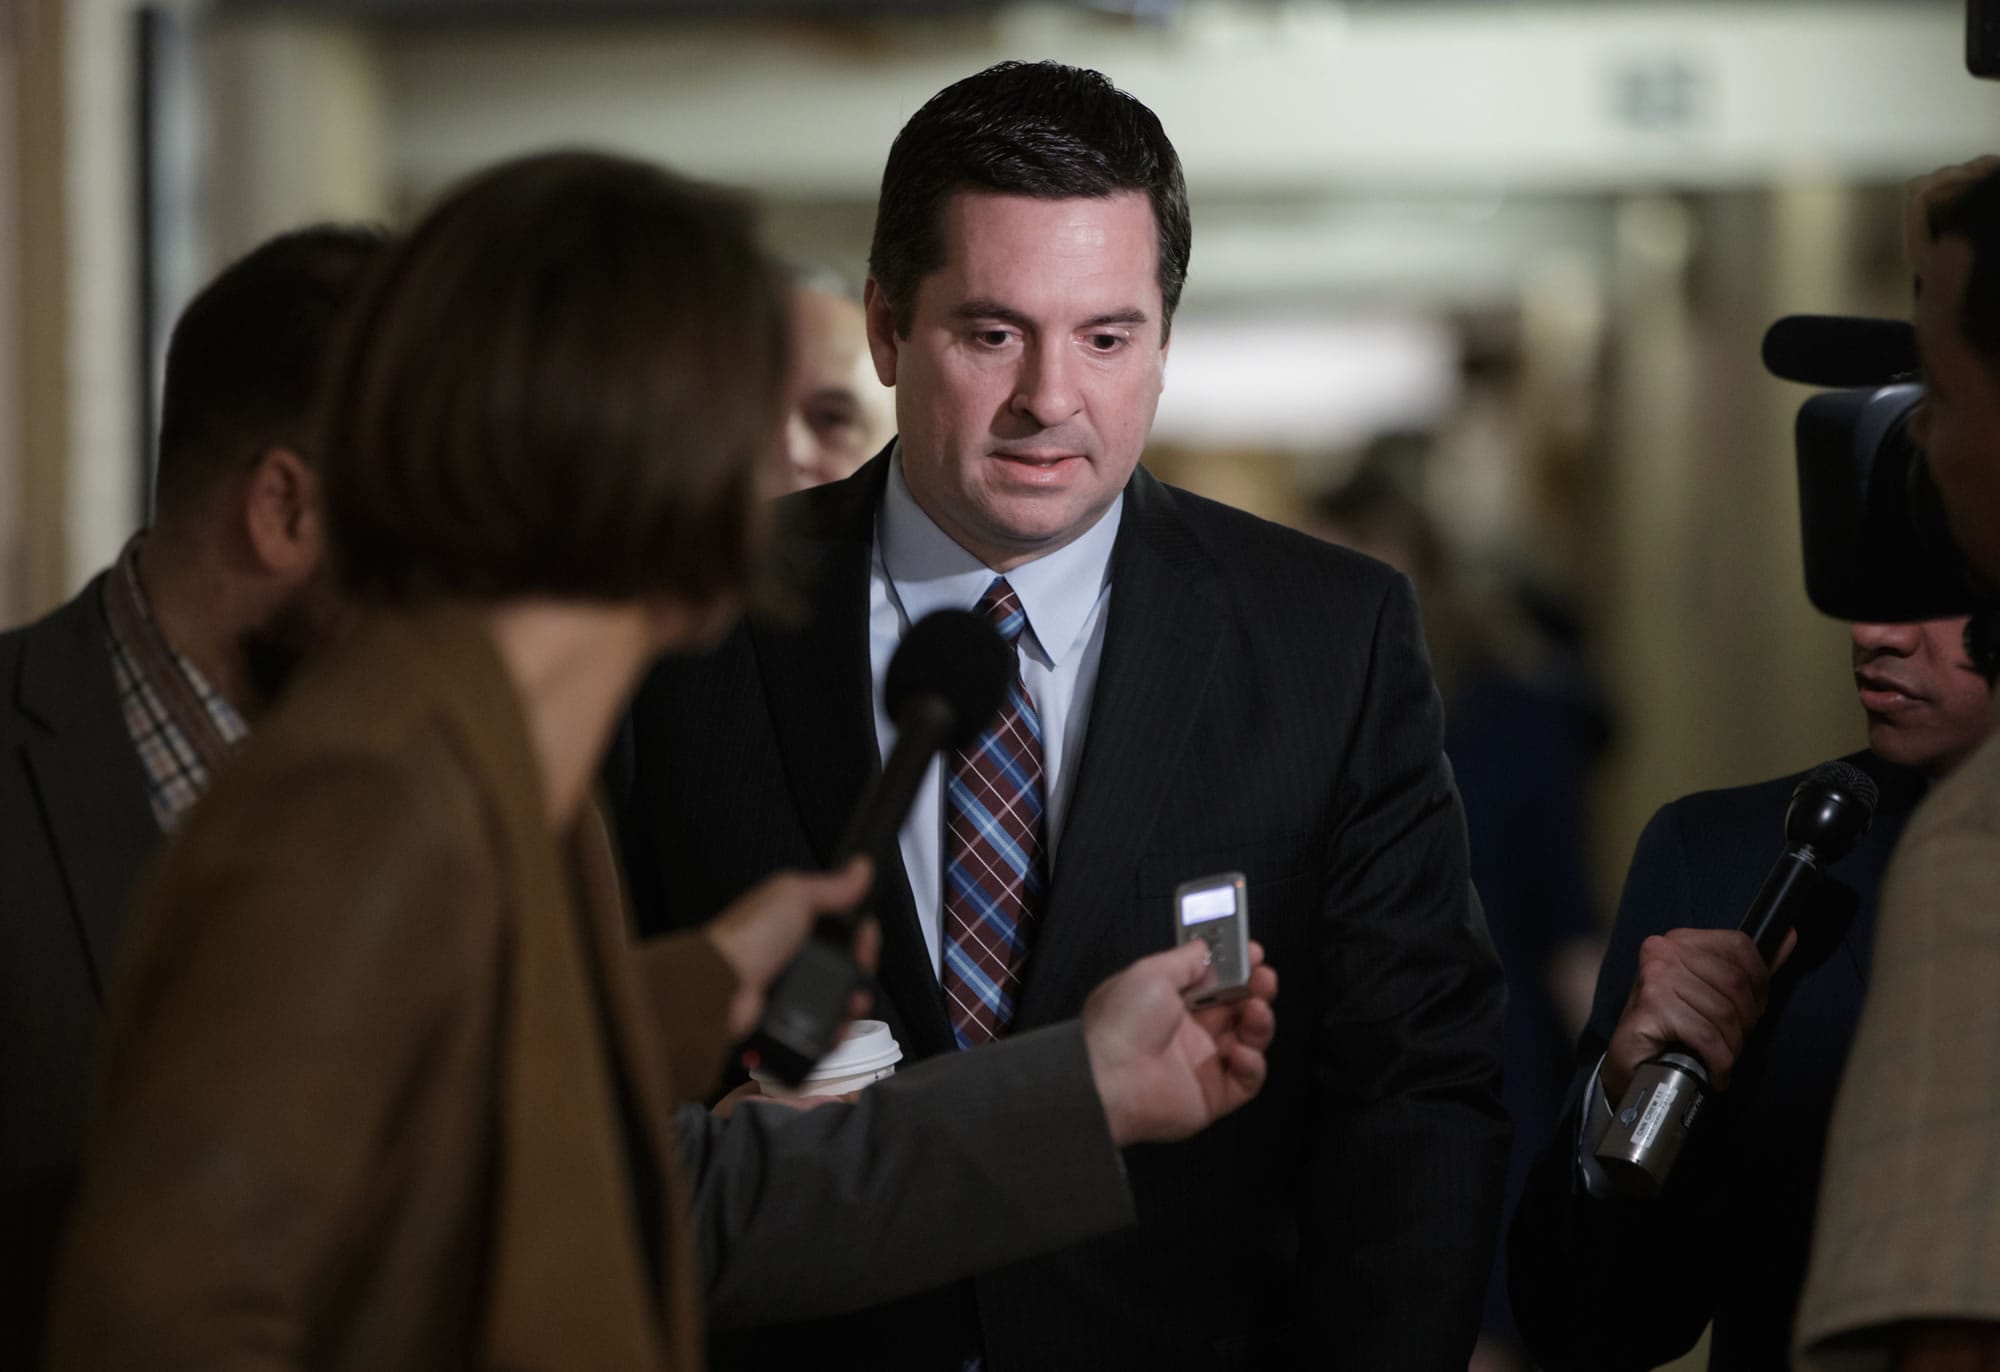 House Intelligence Committee Chairman Rep. Devin Nunes, R-Calif. is pursued by reporters as he arrives for a weekly meeting of the Republican Conference with House Speaker Paul Ryan and the GOP leadership, Tuesday, March 28, 2017, on Capitol Hill in Washington. Nunes is facing growing calls to step away from the panel's Russia investigation as revelations about a secret source meeting on White House grounds raised questions about his and the panel's independence. (AP Photo/J.